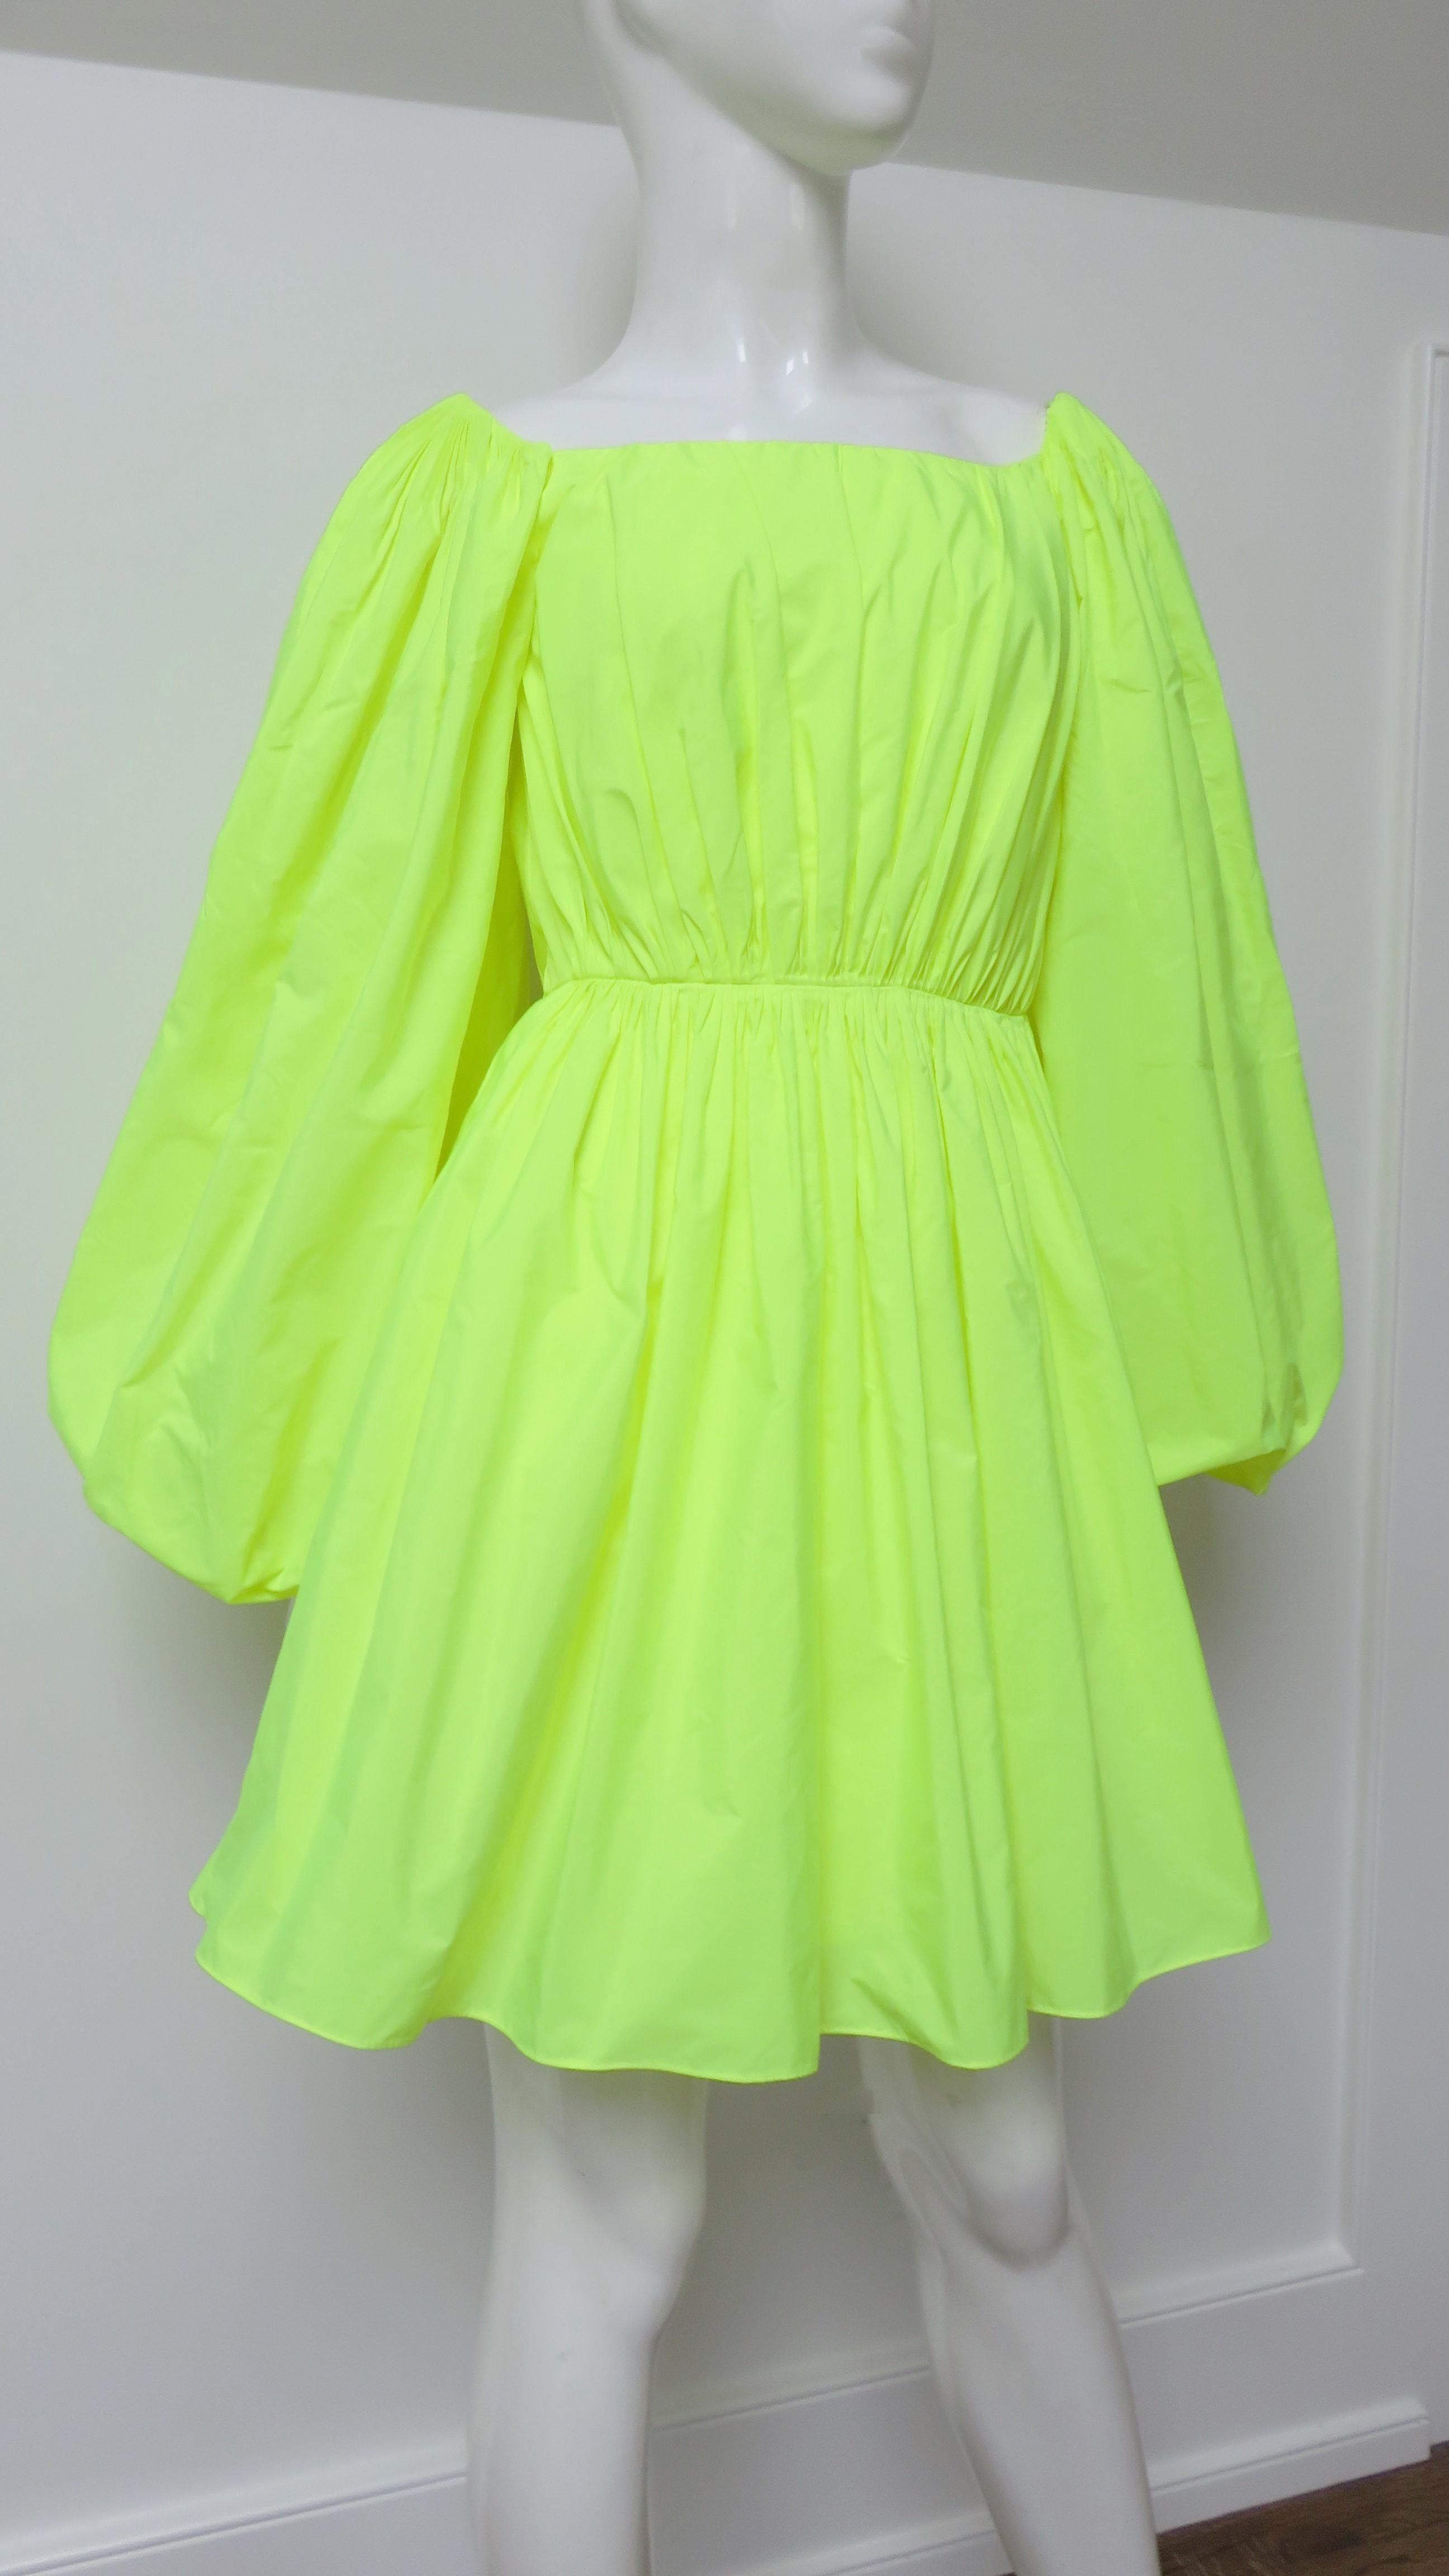 Valentino New Neon Dress In New Condition For Sale In Water Mill, NY